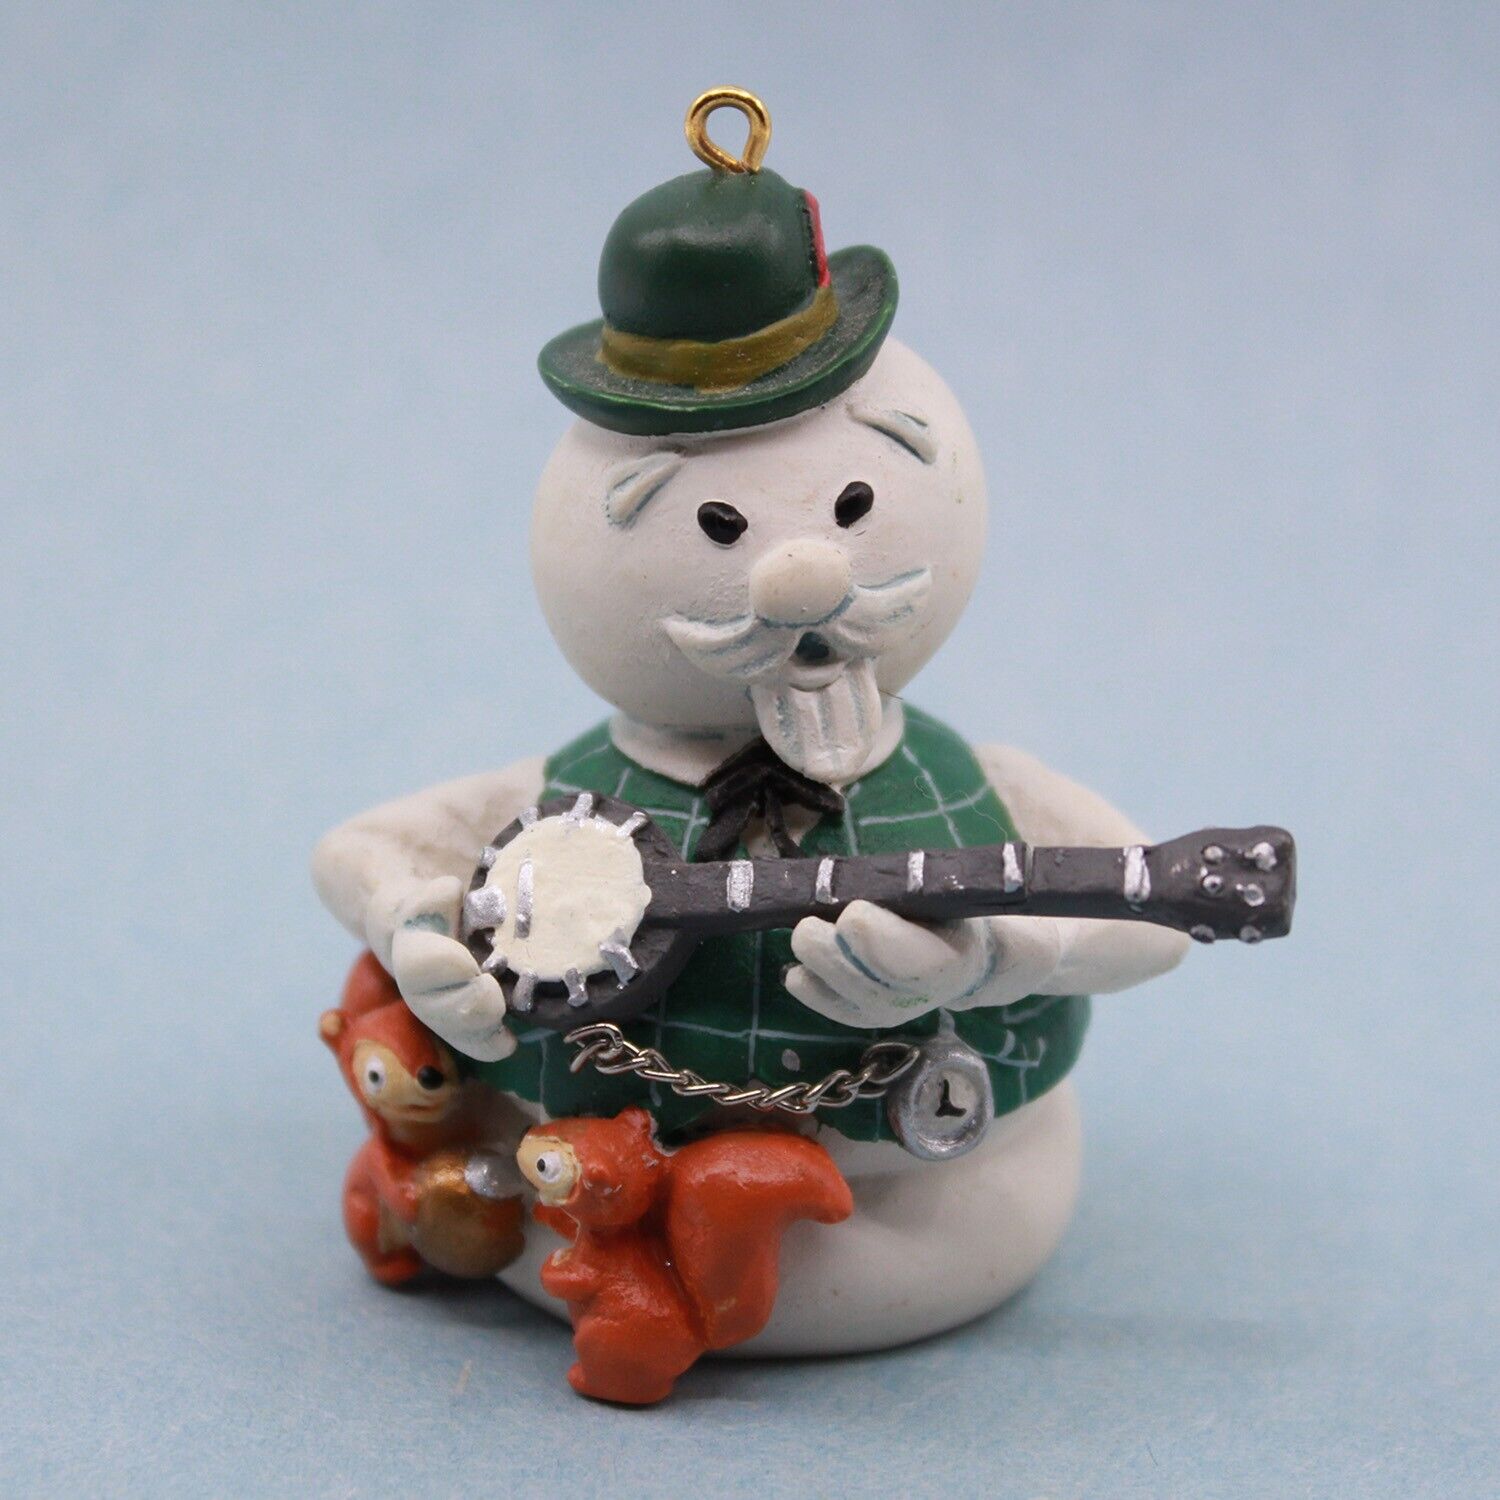 Sam the Snowman Playing Banjo Christmas Ornament - 2003 Rudolph Co